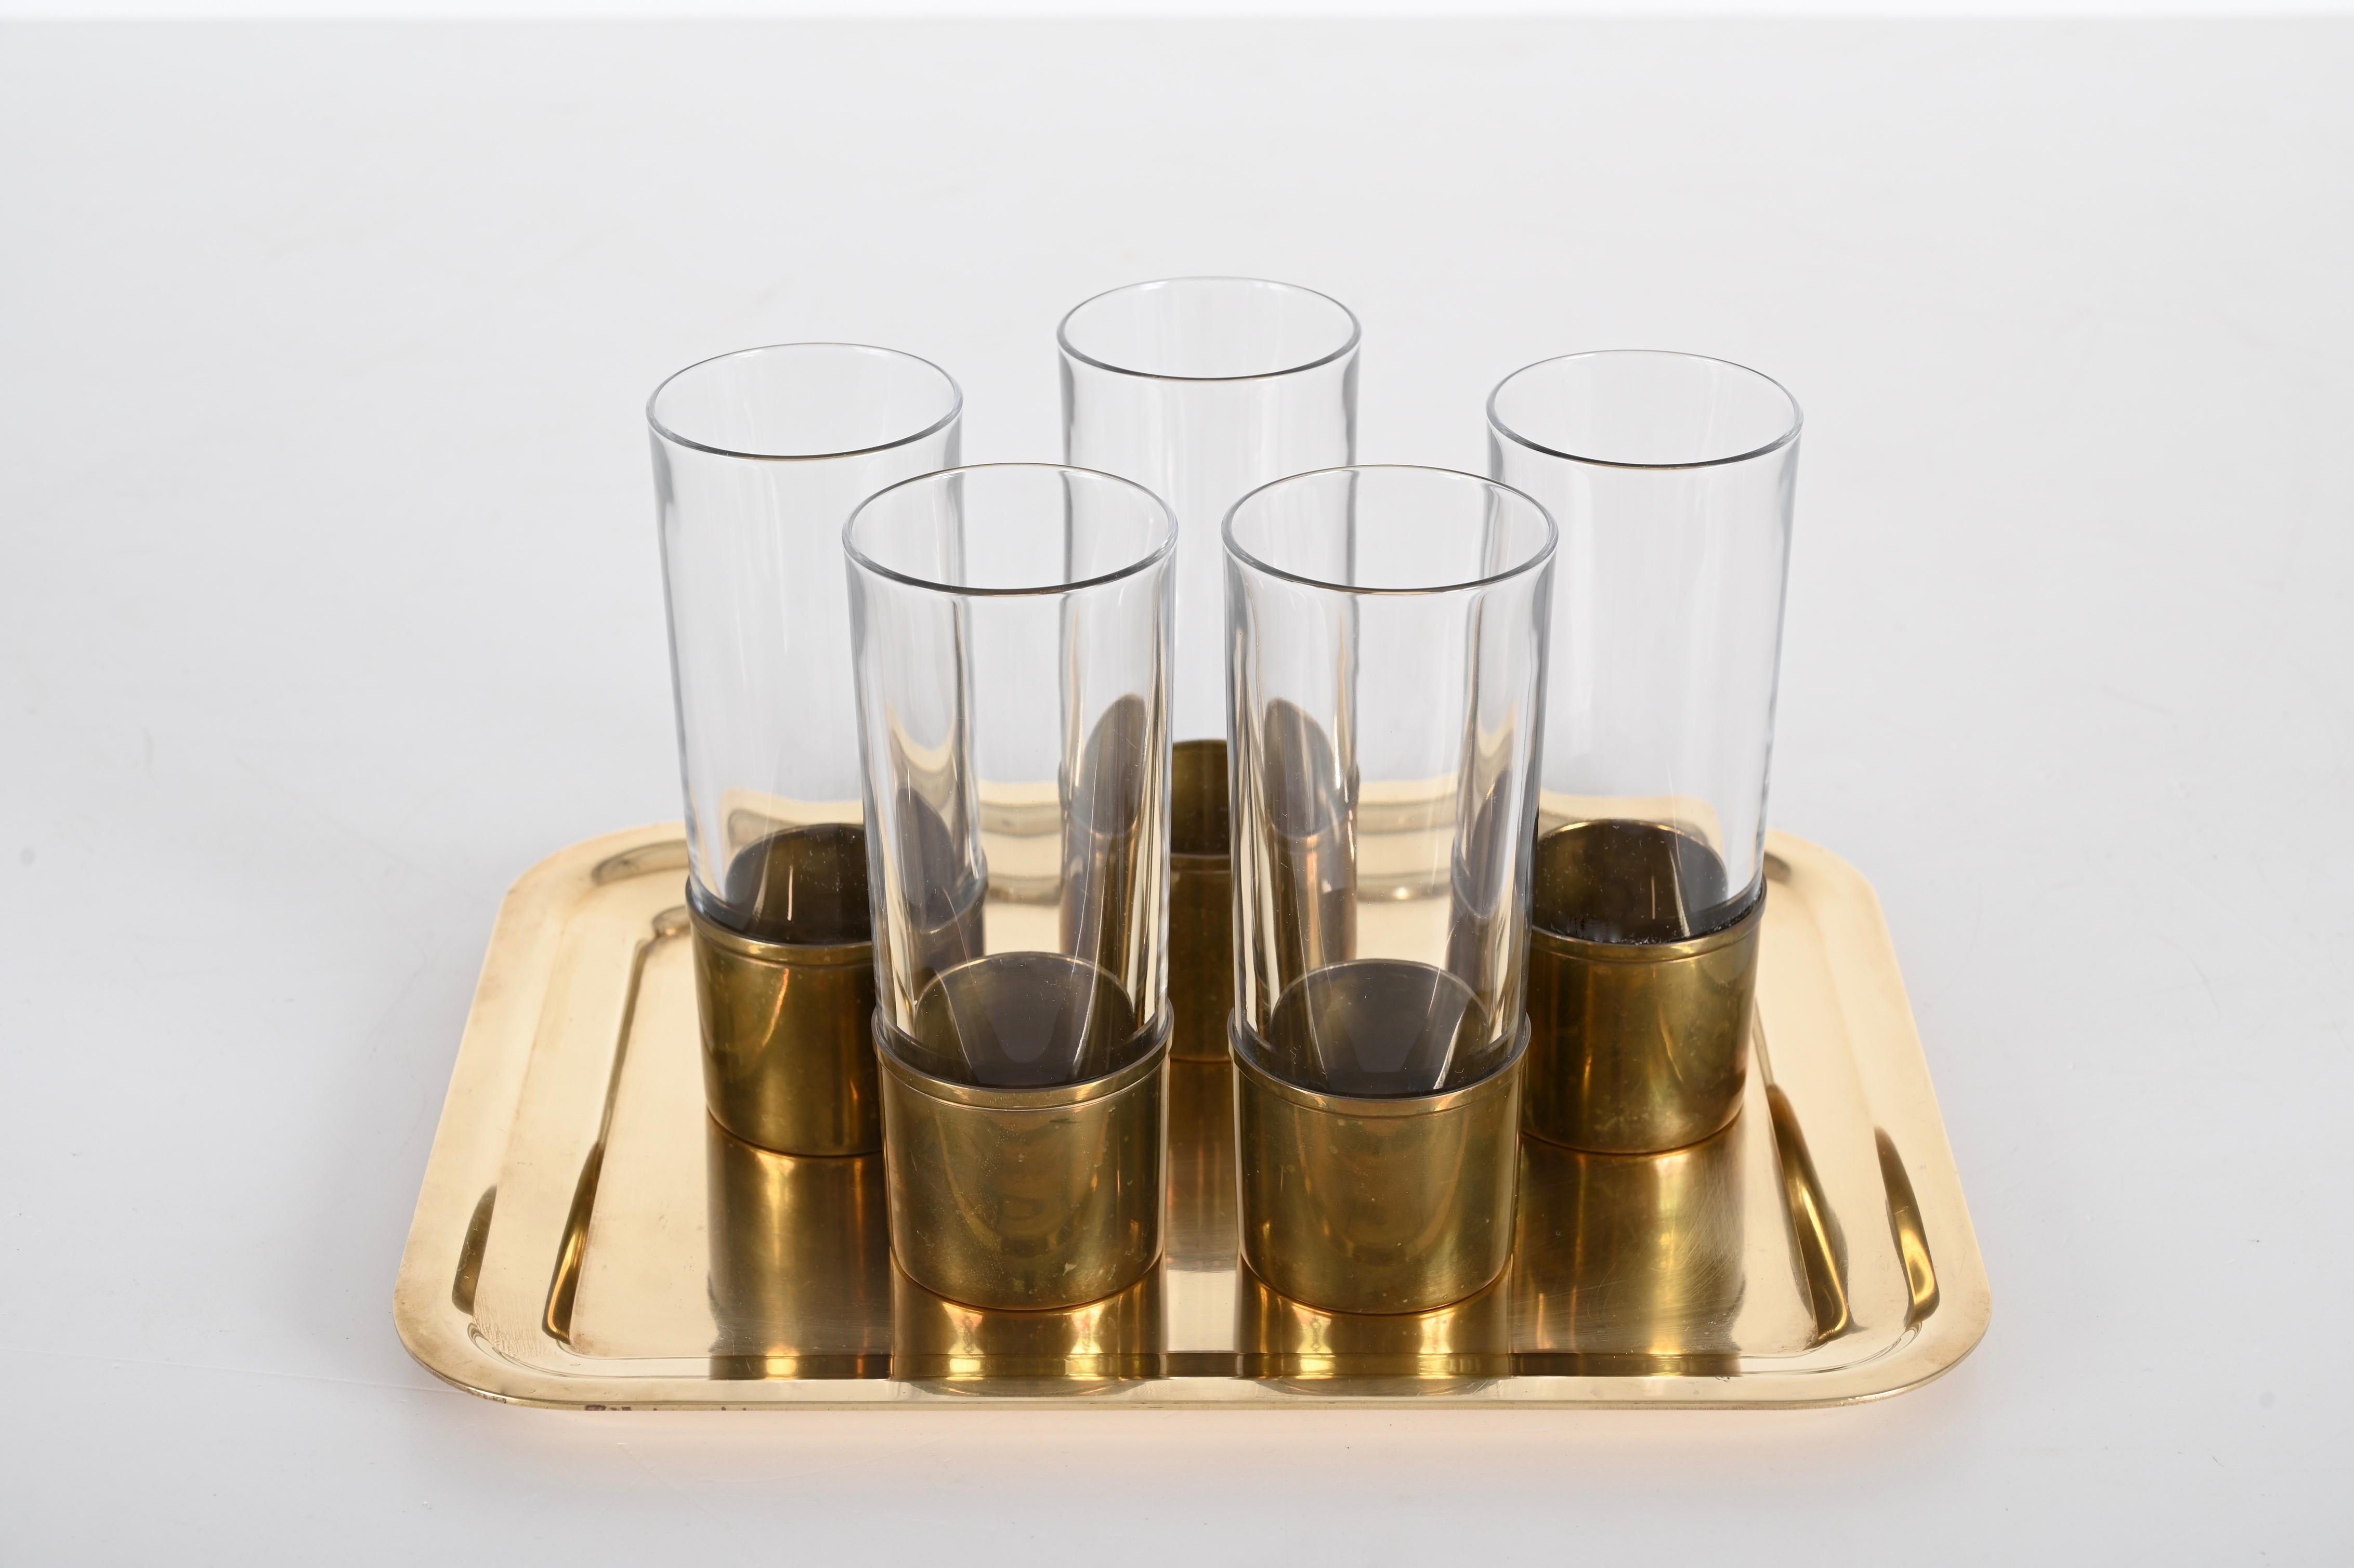 Excellent set of Italian crystal glasses with brass base ad tray. Claude Delvè designed this set in Italy during the 1970s for Delfi.

This piece is unique because it comprises five crystal glasses encased in a brass base. The glass can be used